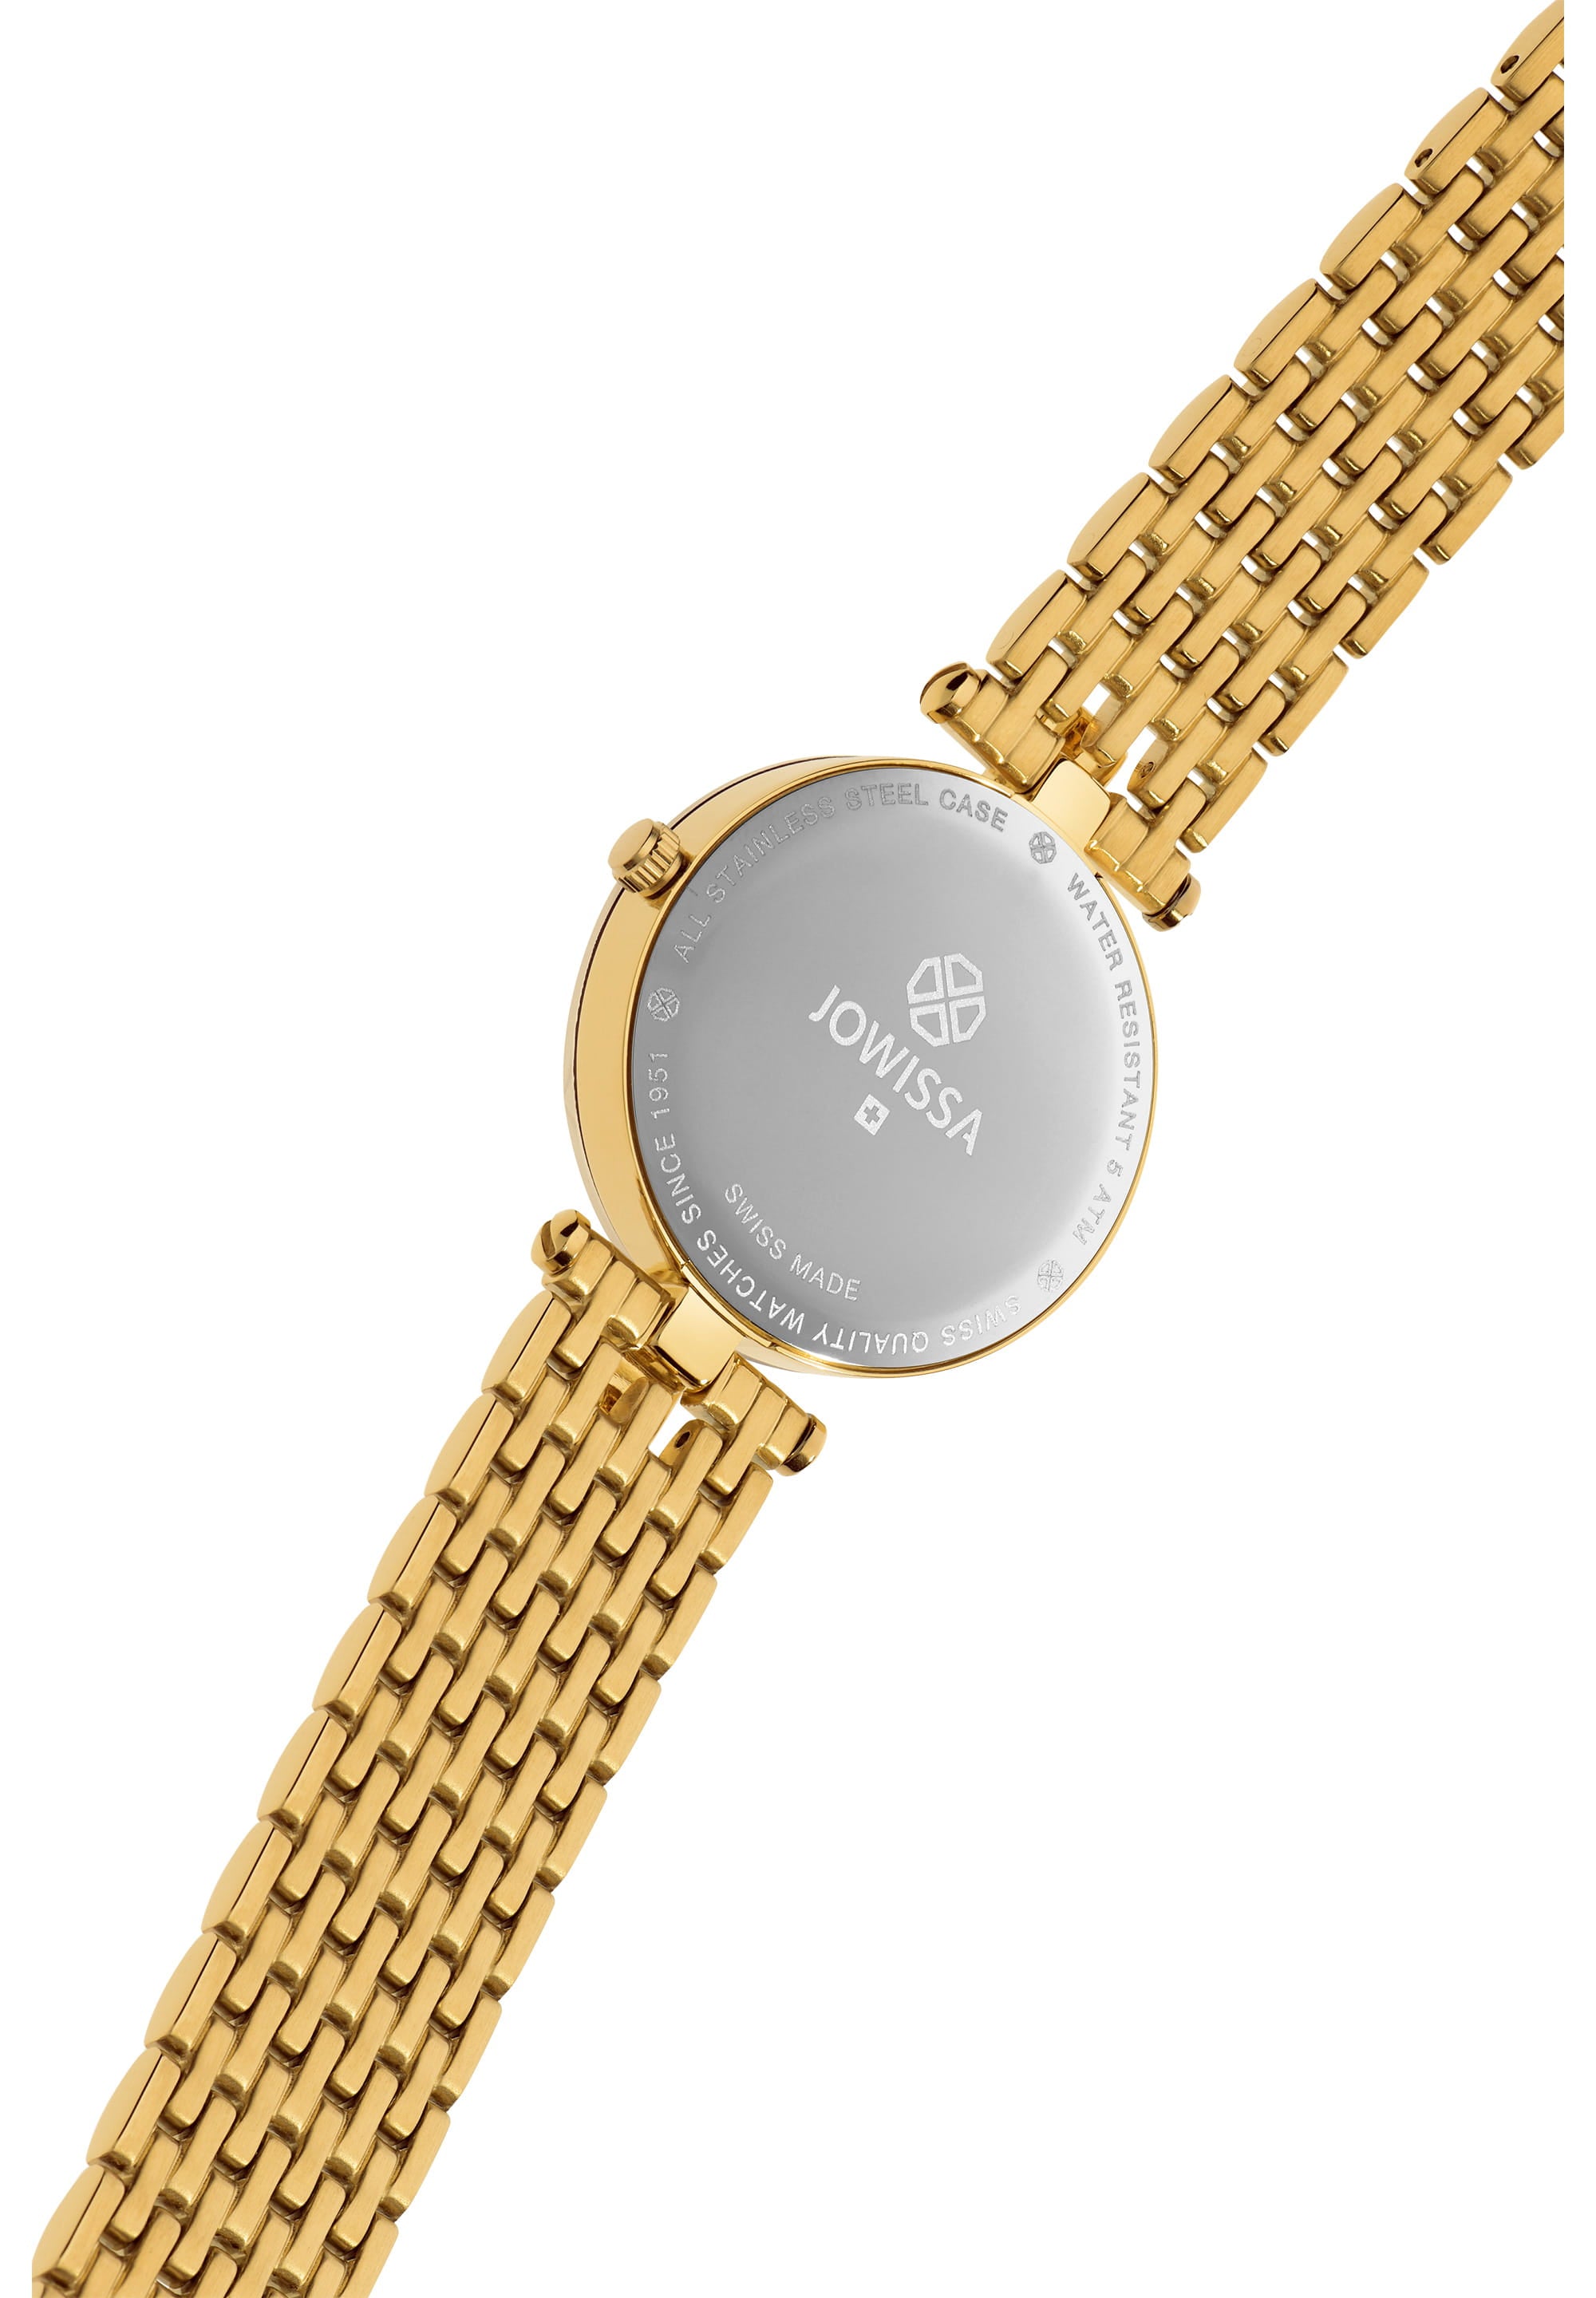 Facet Strass Reloj Mujer Suizo J5.629.M